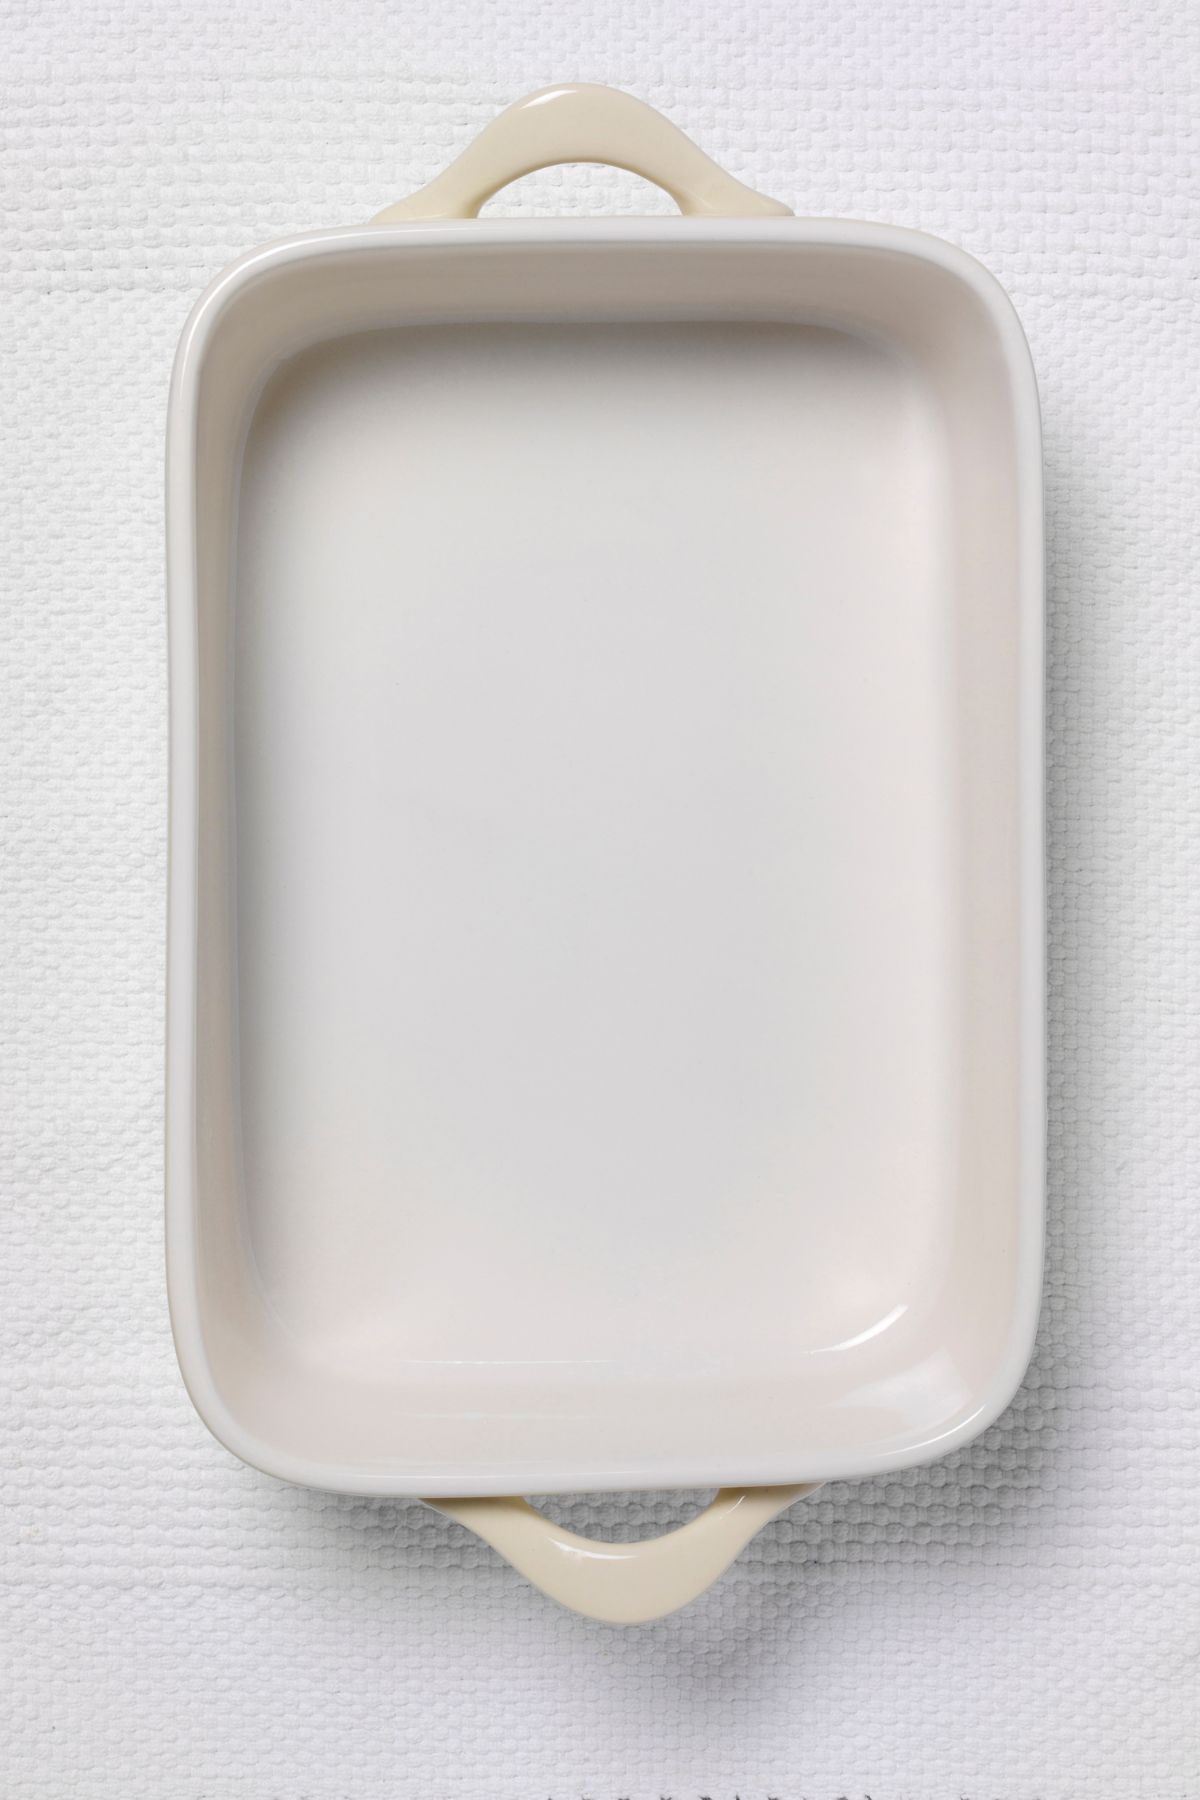 empty white 9x13 casserole dish with handles